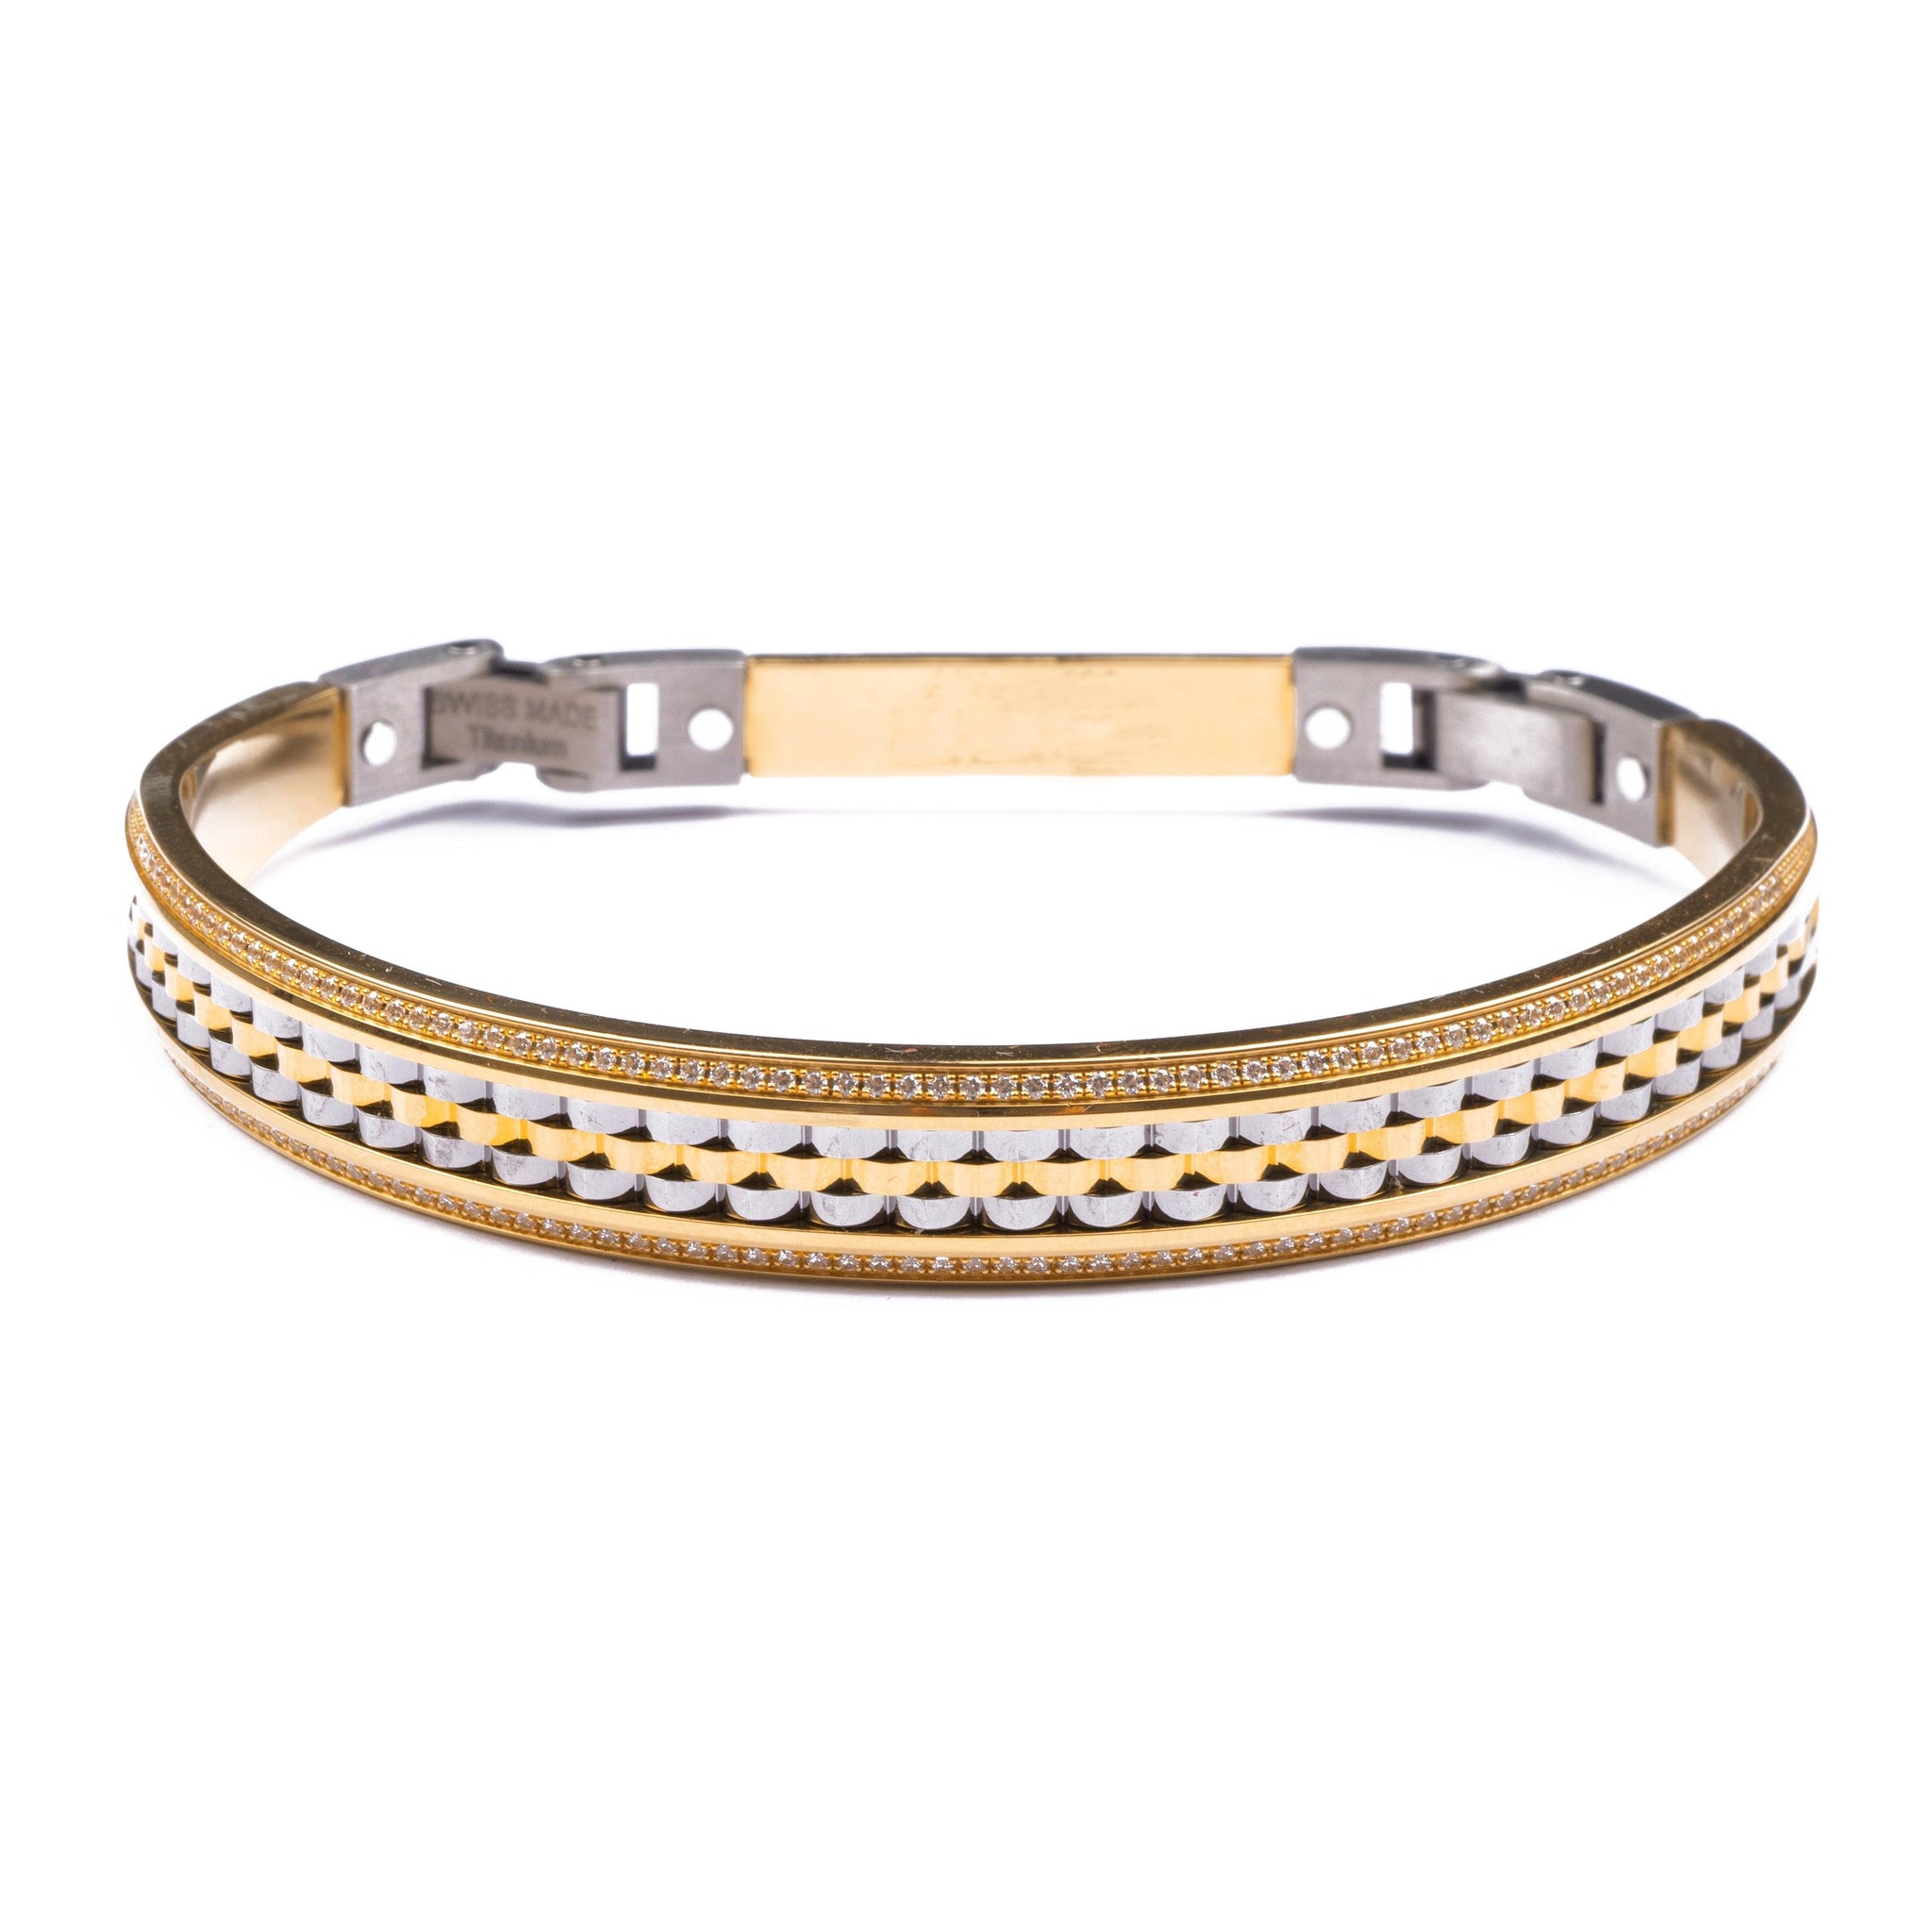 22ct Gold Openable Premium Bangle with Diamond Cut and Rhodium Design, set with Cubic Zirconias and comes with a Swiss made Titanium Clasp B-8415